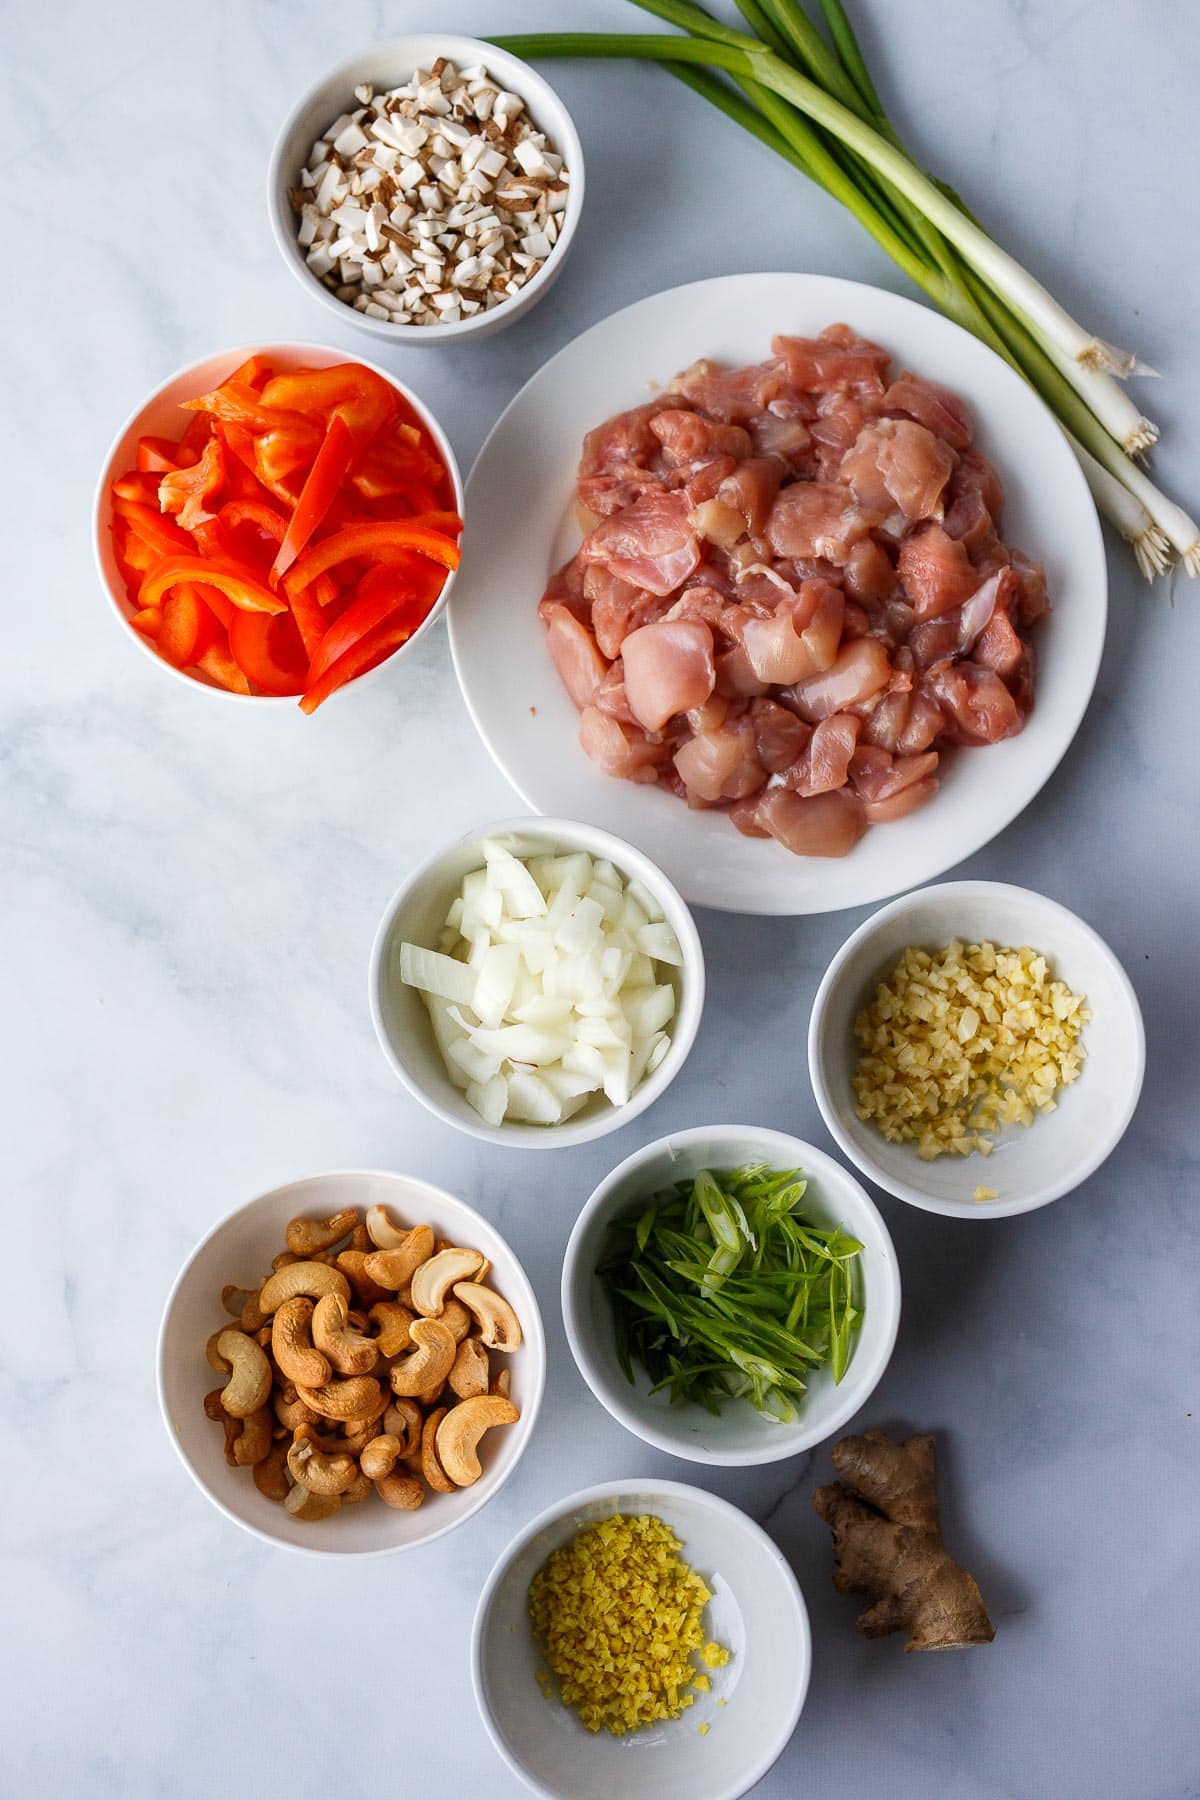 Chopped ingredients for cashew chicken.